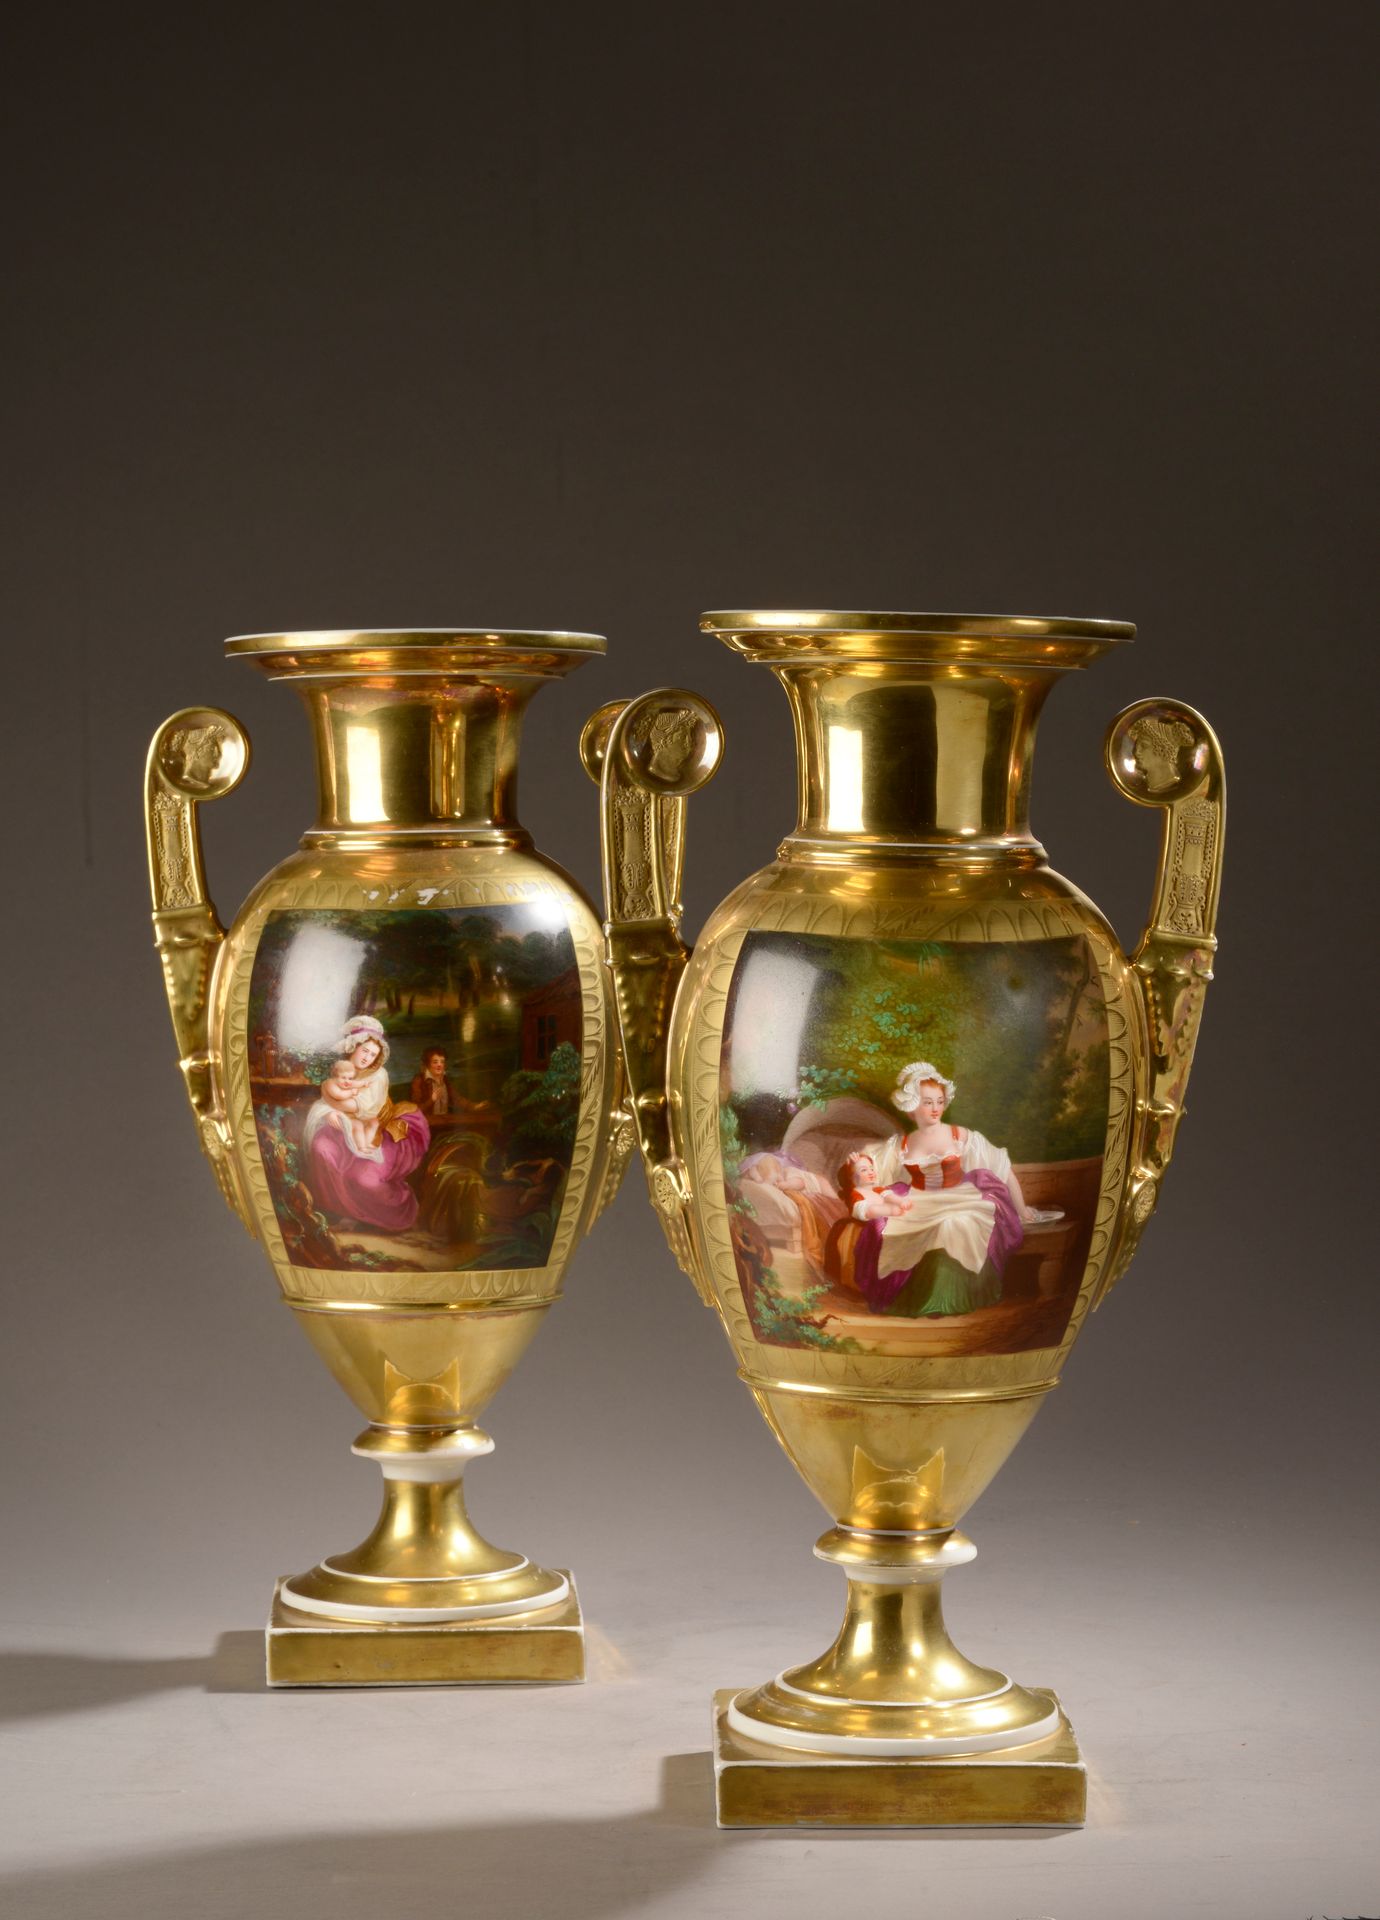 Null PARIS.
Pair of porcelain vases on pedestal with polychrome decoration of sc&hellip;